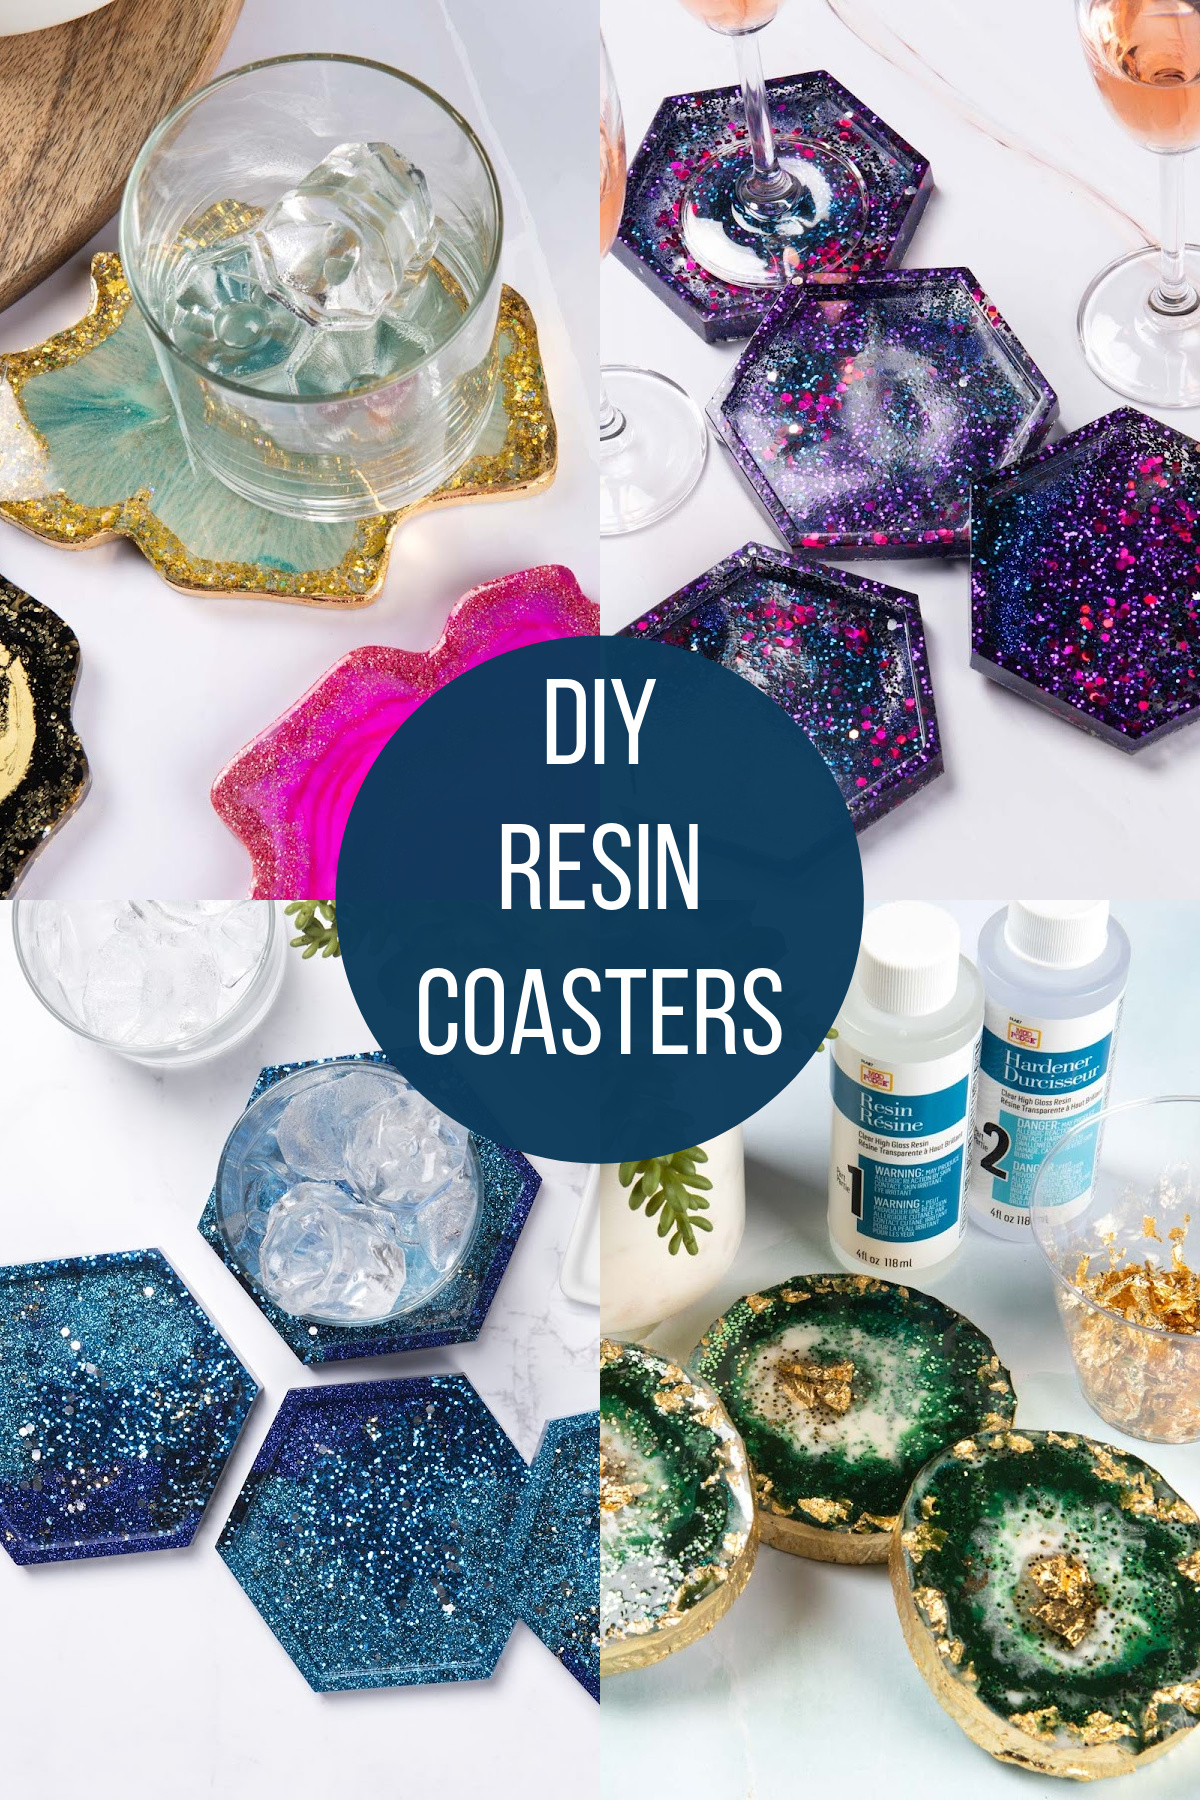 Resin coasters to make for decor or gifts